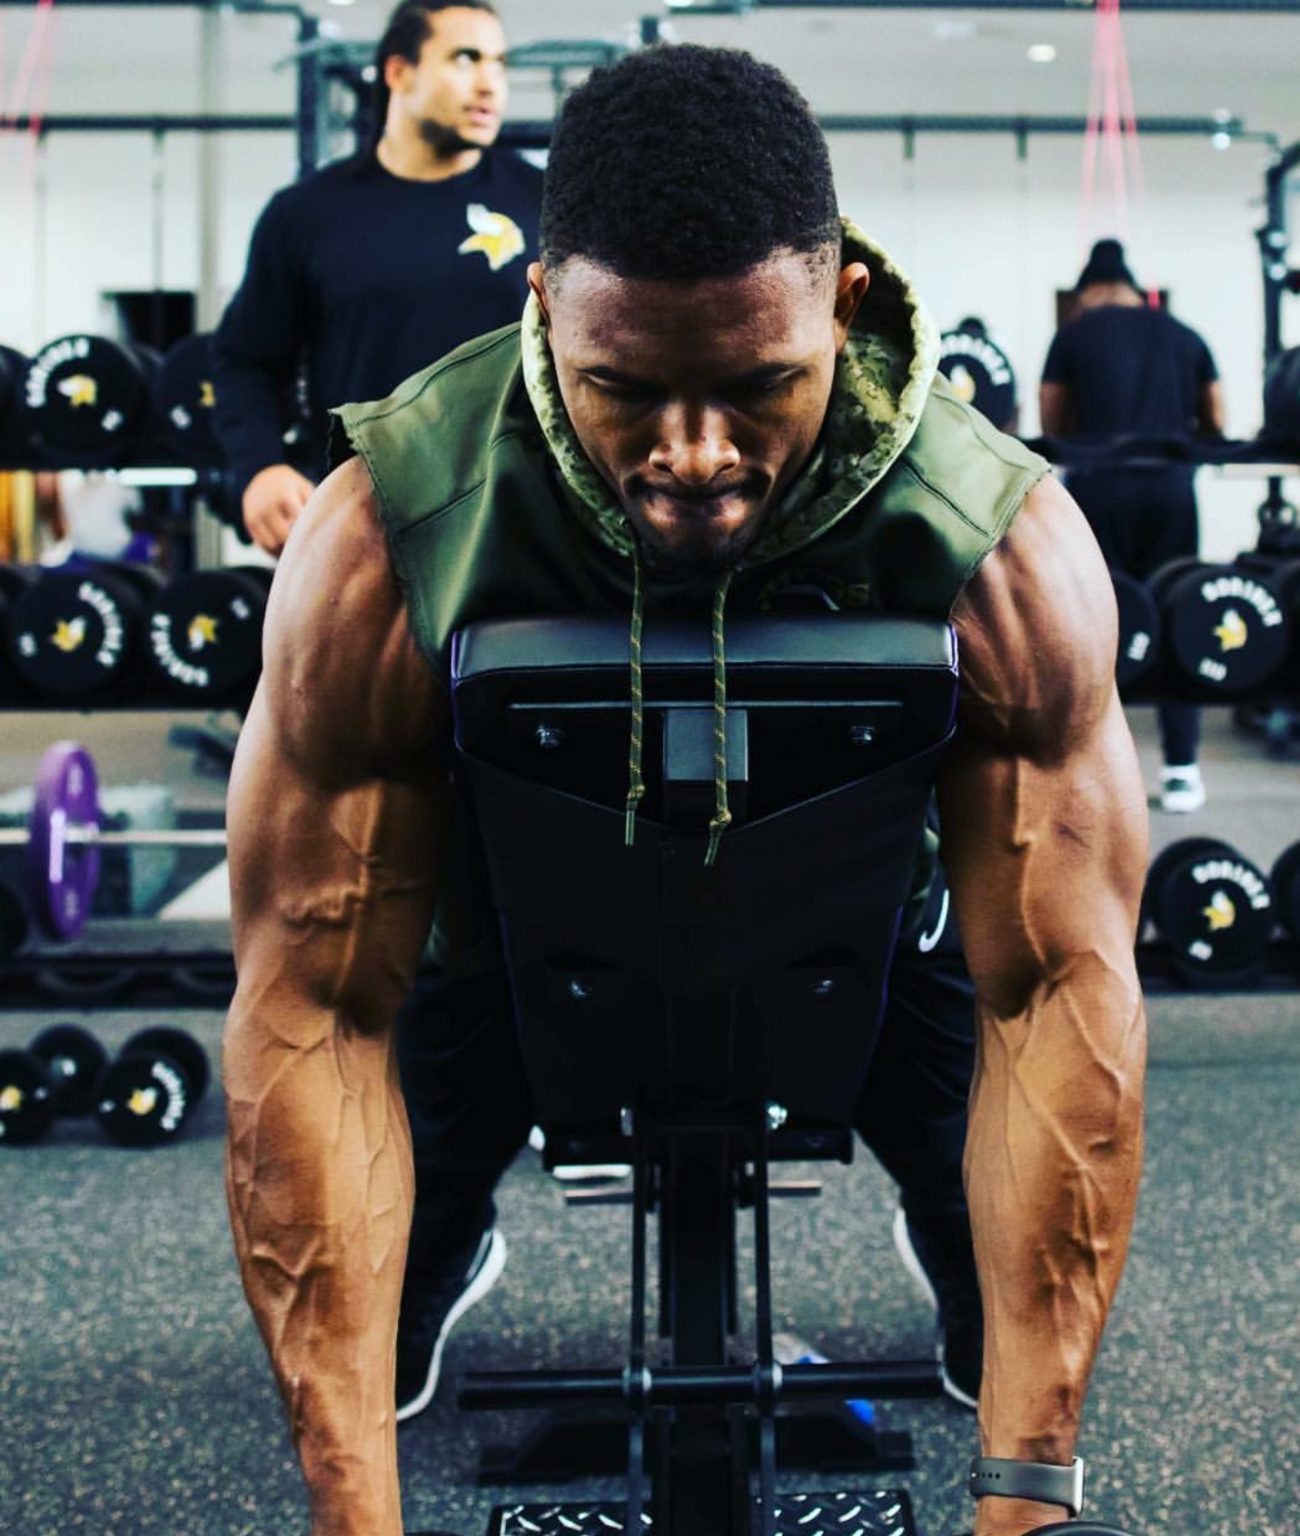 Danielle Hunter: The Most Jacked Player in the NFL